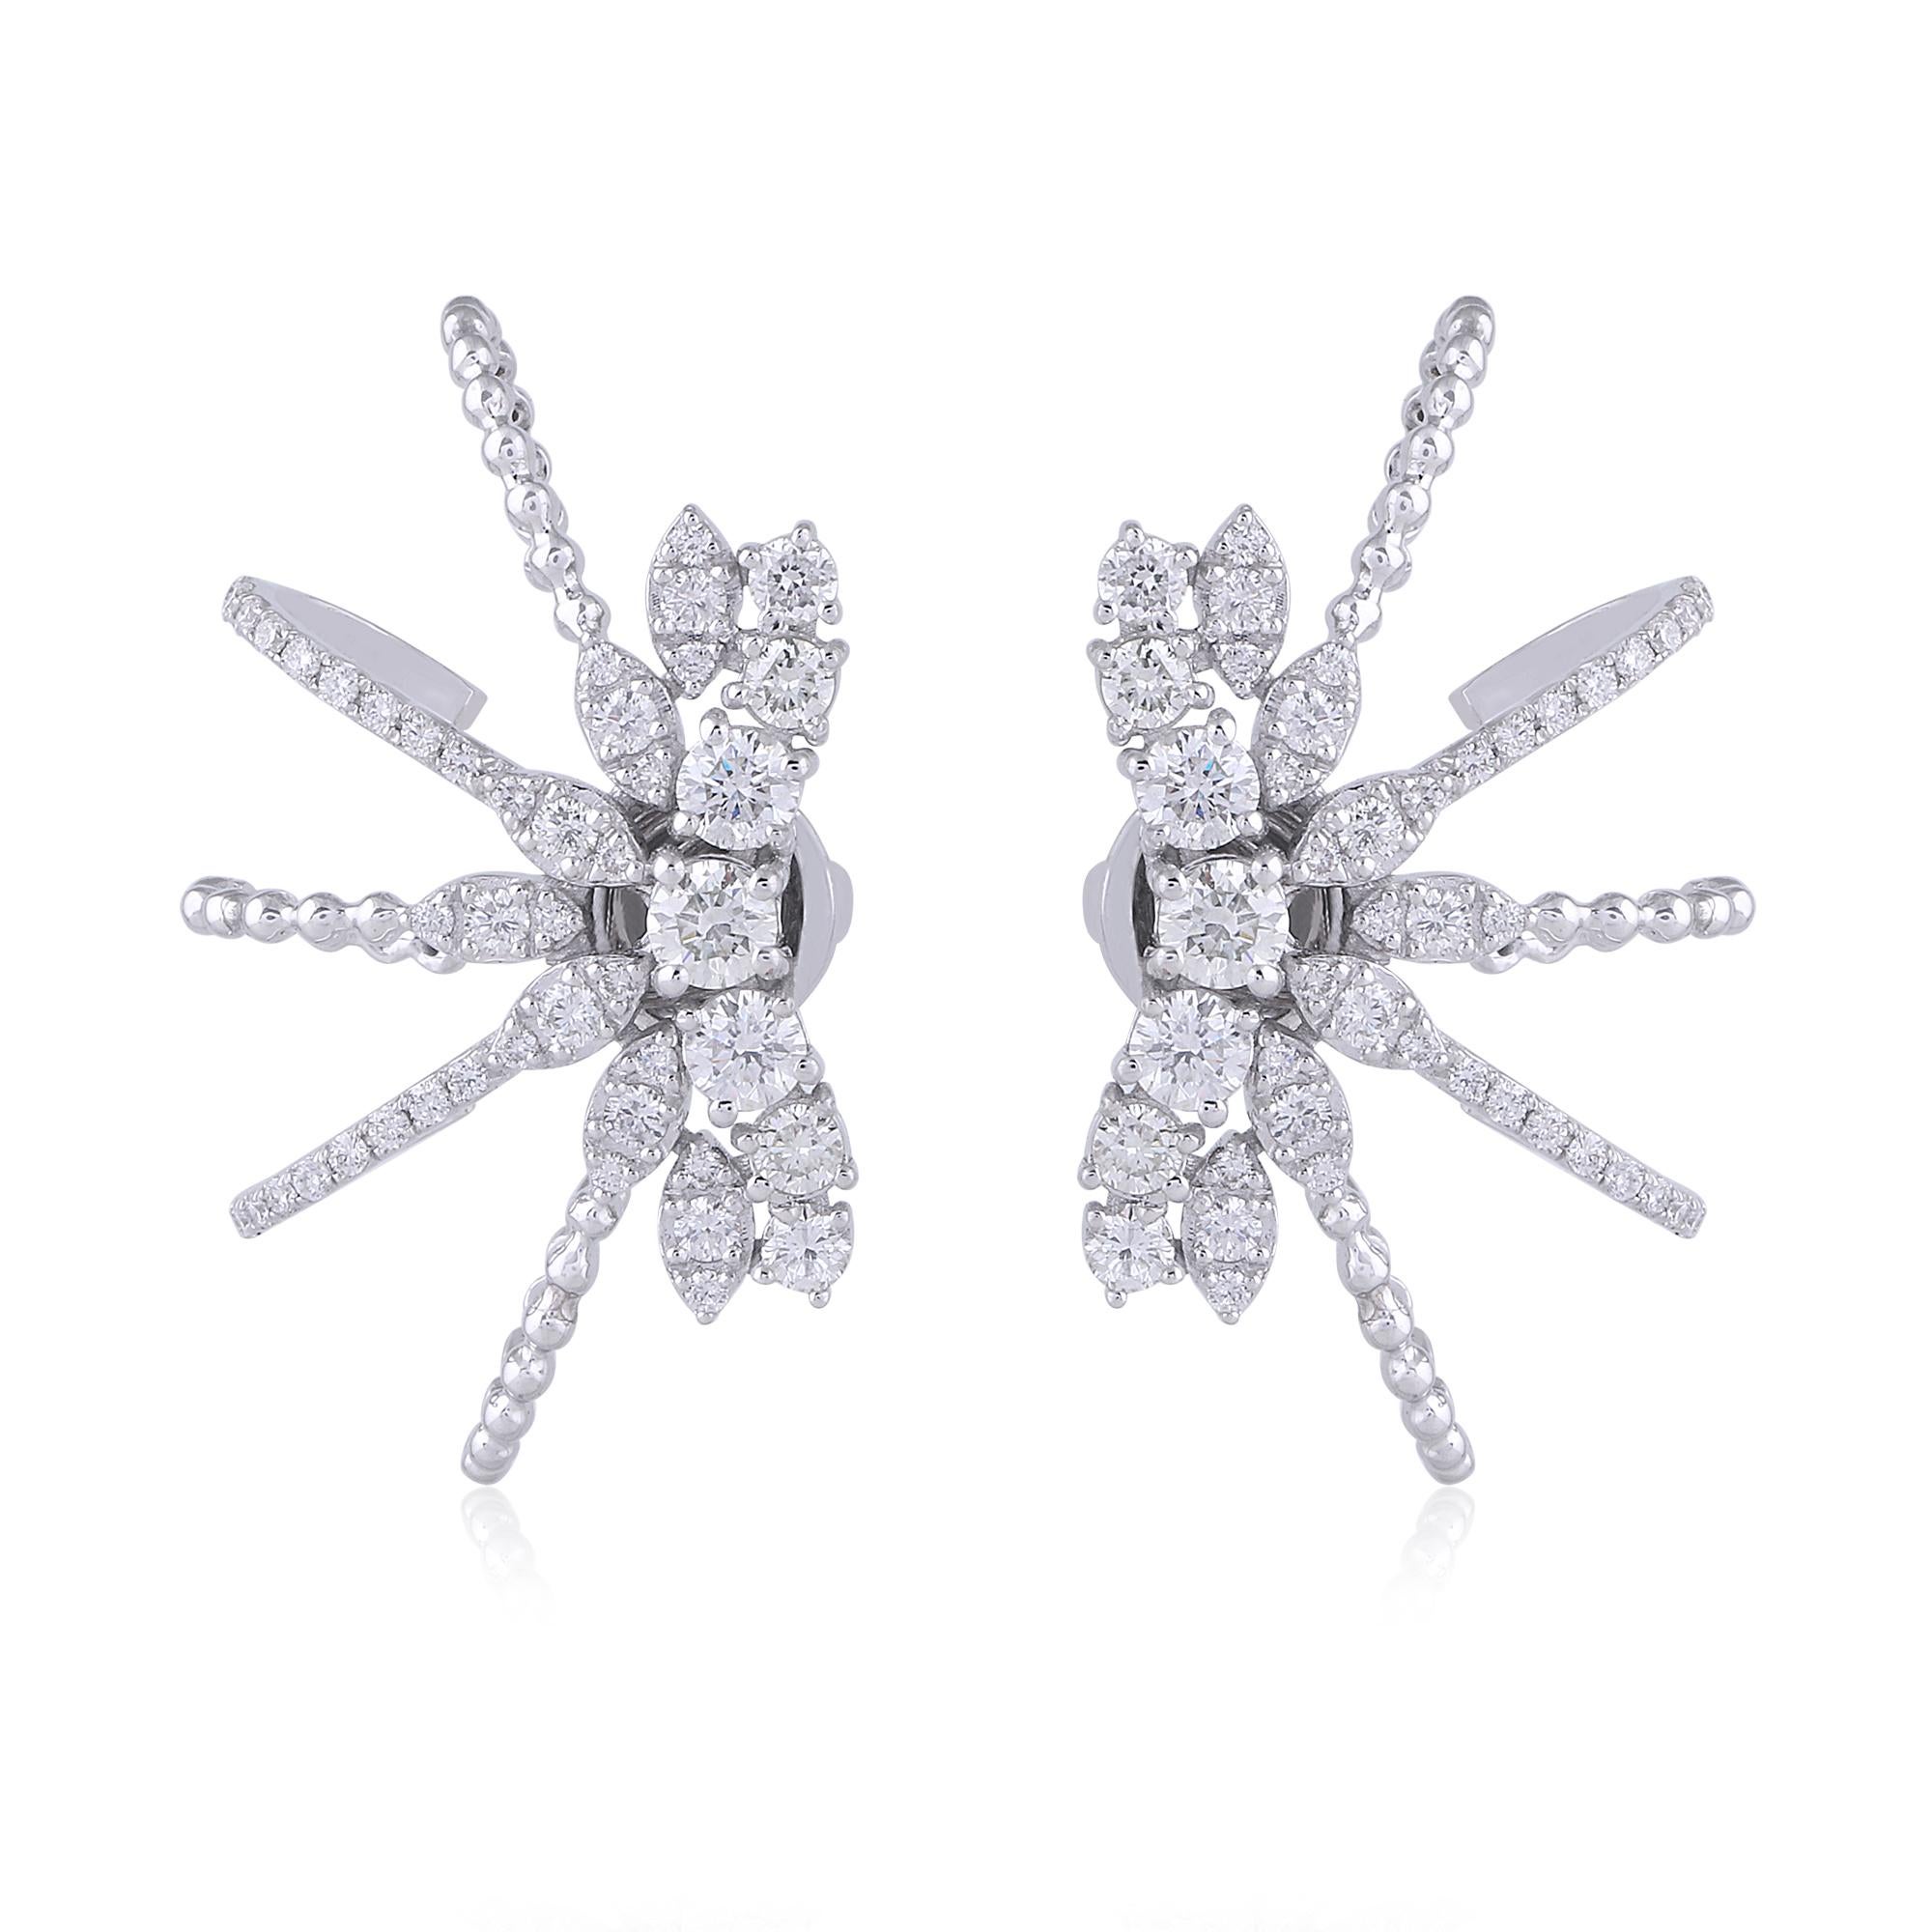 Item Code :- CN-26395
Gross Weight :- 7.72 gm
18k White Gold Weight :- 7.38 gm
Diamond Weight :- 1.70 Carat  ( AVERAGE DIAMOND CLARITY SI1-SI2 & COLOR H-I )
Earrings Size :- 19x18 mm approx.
✦ Sizing
.....................
We can adjust most items to